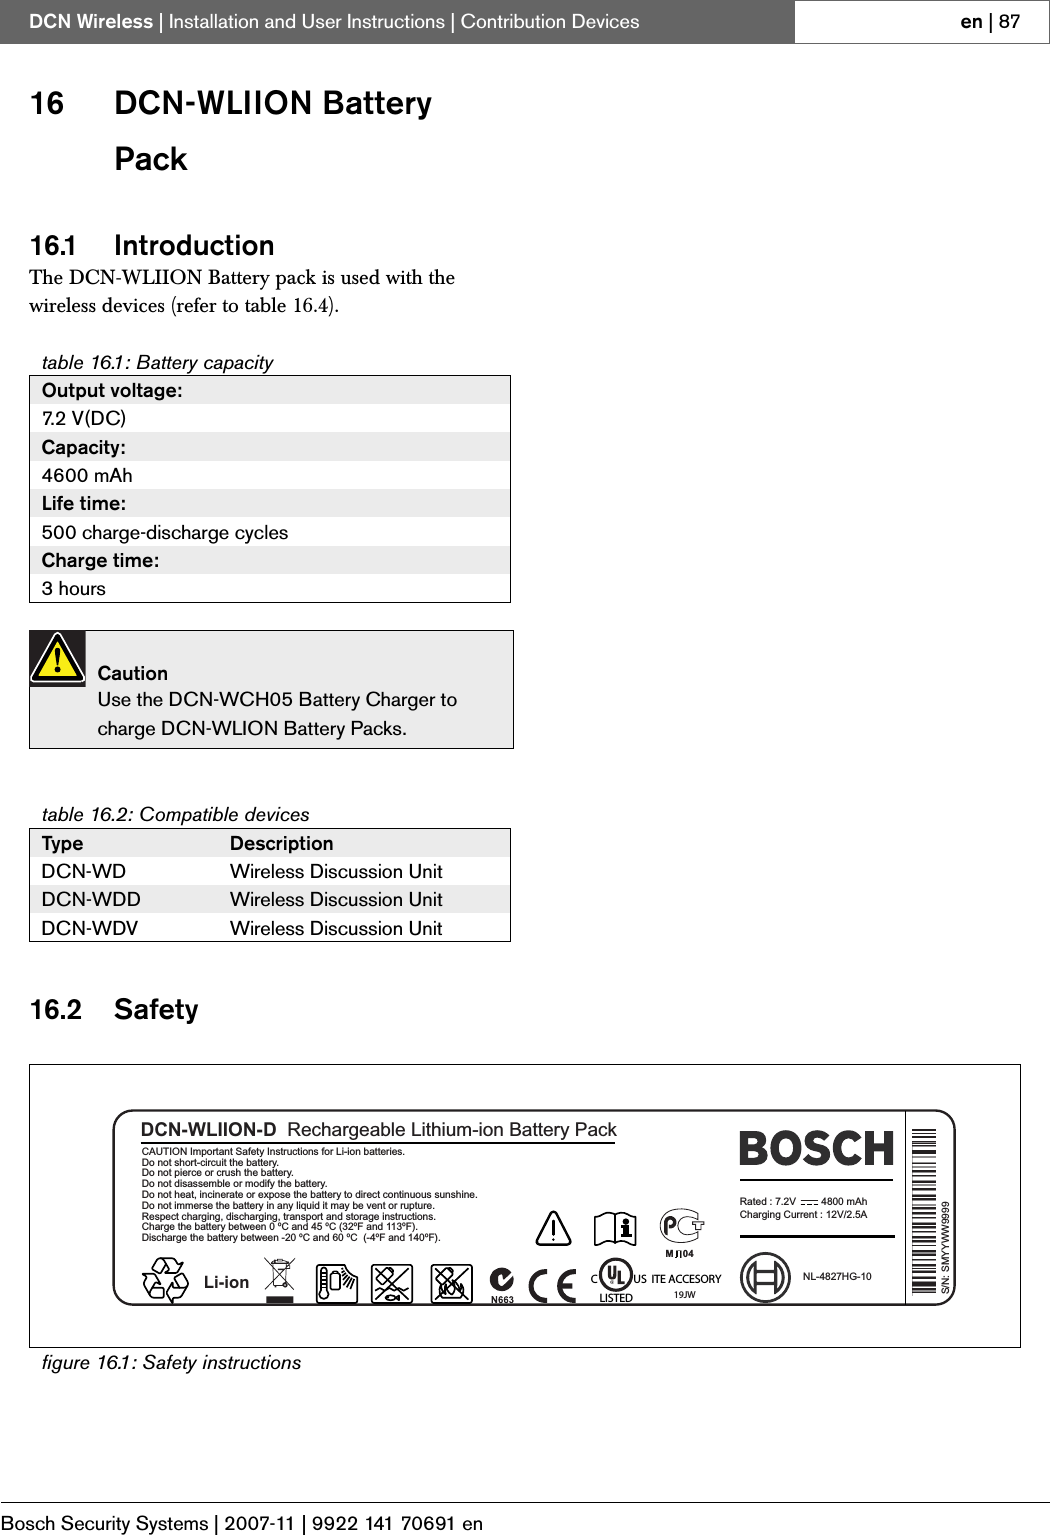 Bosch Security Systems | 2007-11 | 9922 141 70691 enDCN Wireless | Installation and User Instructions | Contribution Devices en | 8716 DCN-WLIION Battery Pack16.1 IntroductionThe DCN-WLIION Battery pack is used with the wireless devices (refer to table 16.4).16.2 Safetytable 16.1: Battery capacityOutput voltage:7. 2  V ( D C )Capacity:4600 mAhLife time:500 charge-discharge cyclesCharge time:3 hoursCautionUse the DCN-WCH05 Battery Charger to charge DCN-WLION Battery Packs.table 16.2: Compatible devicesType DescriptionDCN-WD Wireless Discussion UnitDCN-WDD Wireless Discussion UnitDCN-WDV Wireless Discussion Unitfigure 16.1: Safety instructionsCAUTION Important Safety Instructions for Li-ion batteries.Do not short-circuit the battery.Do not pierce or crush the battery.Do not disassemble or modify the battery.Do not heat, incinerate or expose the battery to direct continuous sunshine.Do not immerse the battery in any liquid it may be vent or rupture.Respect charging, discharging, transport and storage instructions.Charge the battery between 0 ºC and 45 ºC (32ºF and 113ºF).Discharge the battery between -20 ºC and 60 ºC (-4ºF and 140ºF).Rated : 7.2V 4800 mAhCharging Current : 12V/2.5ADCN-WLIION-D Rechargeable Lithium-ion Battery PackNL-4827HG-10S/N: SMYYWW9999Li-ionUS ITE ACCESORYCLISTED 19JWM04